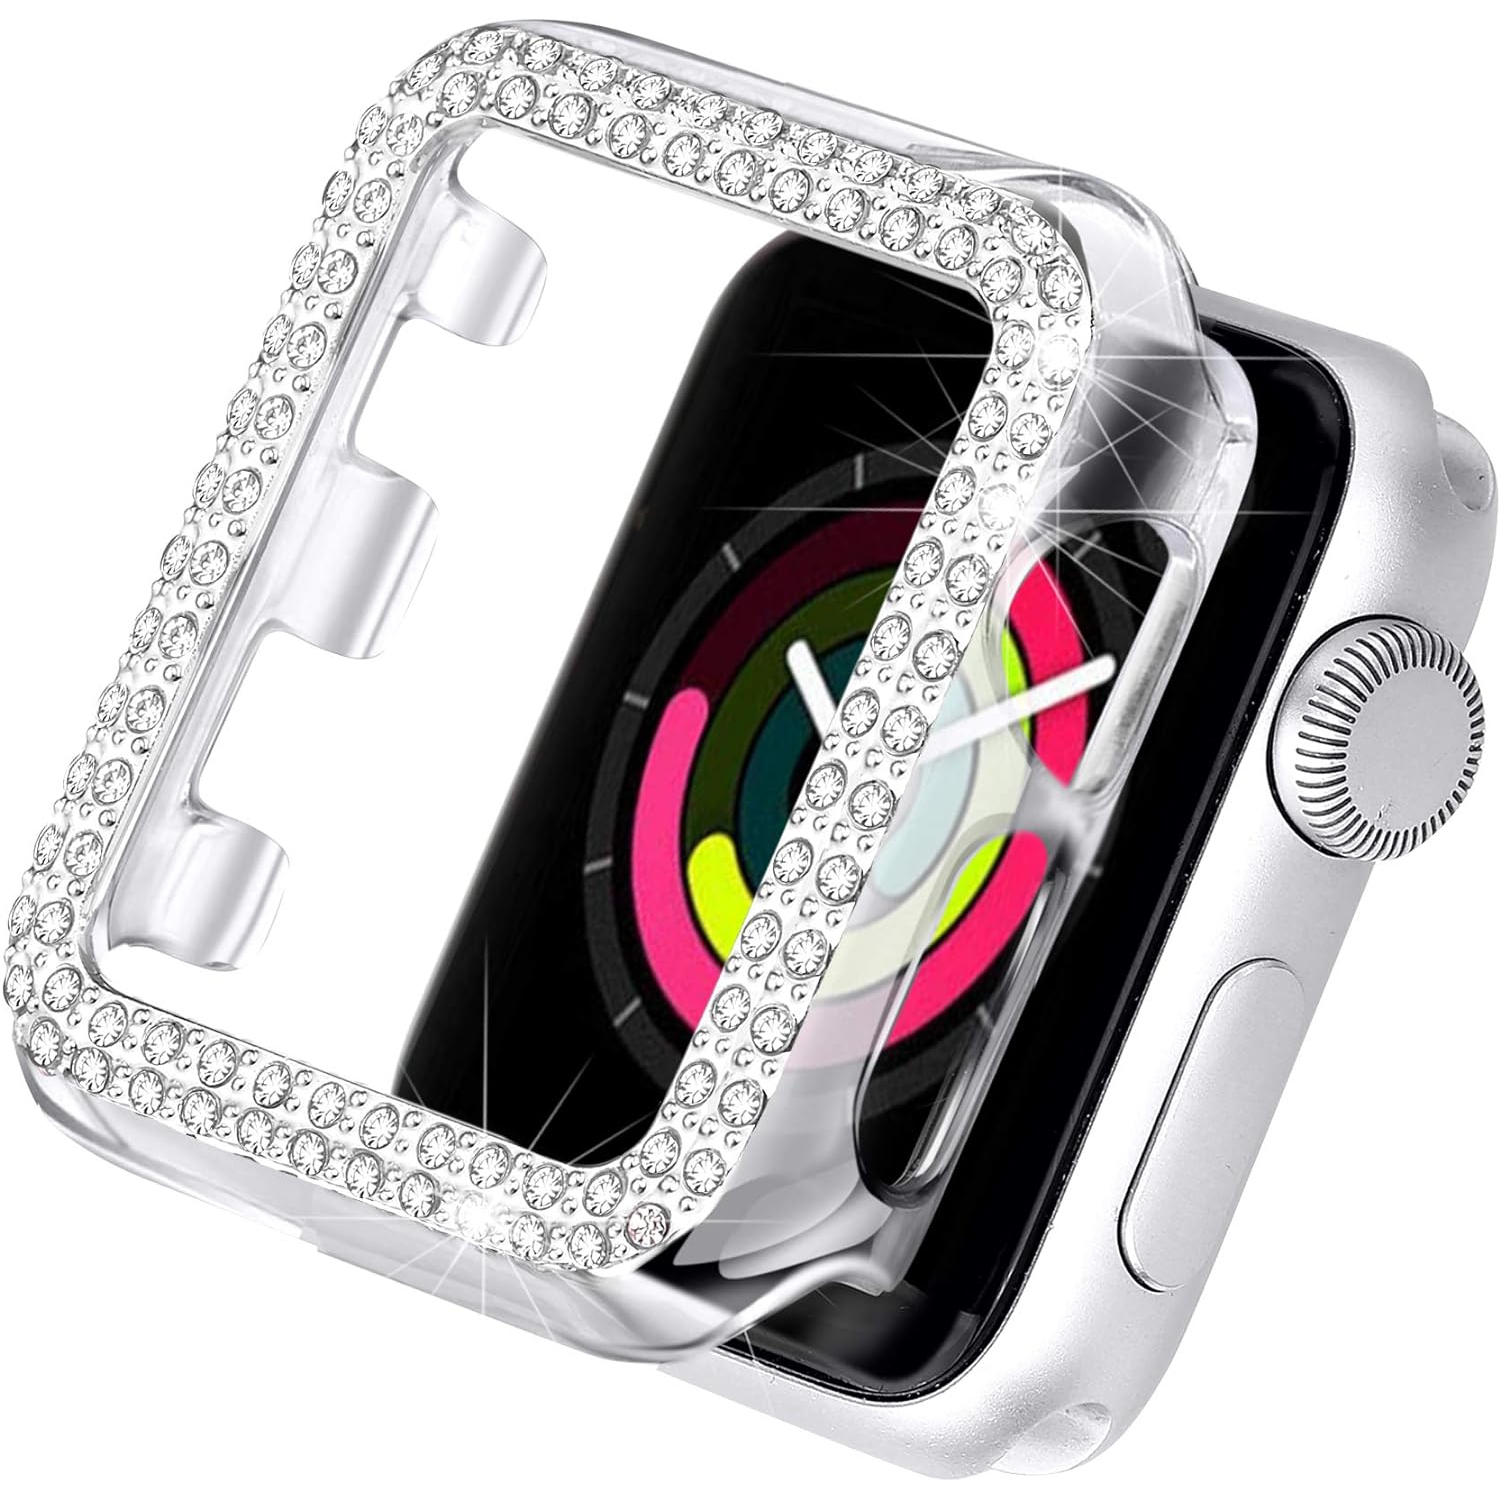 Bling Case Compatible with Apple Watch 38mm 40mm 42mm 44mm, Full Cover Bumper Protective Frame Screen Protector